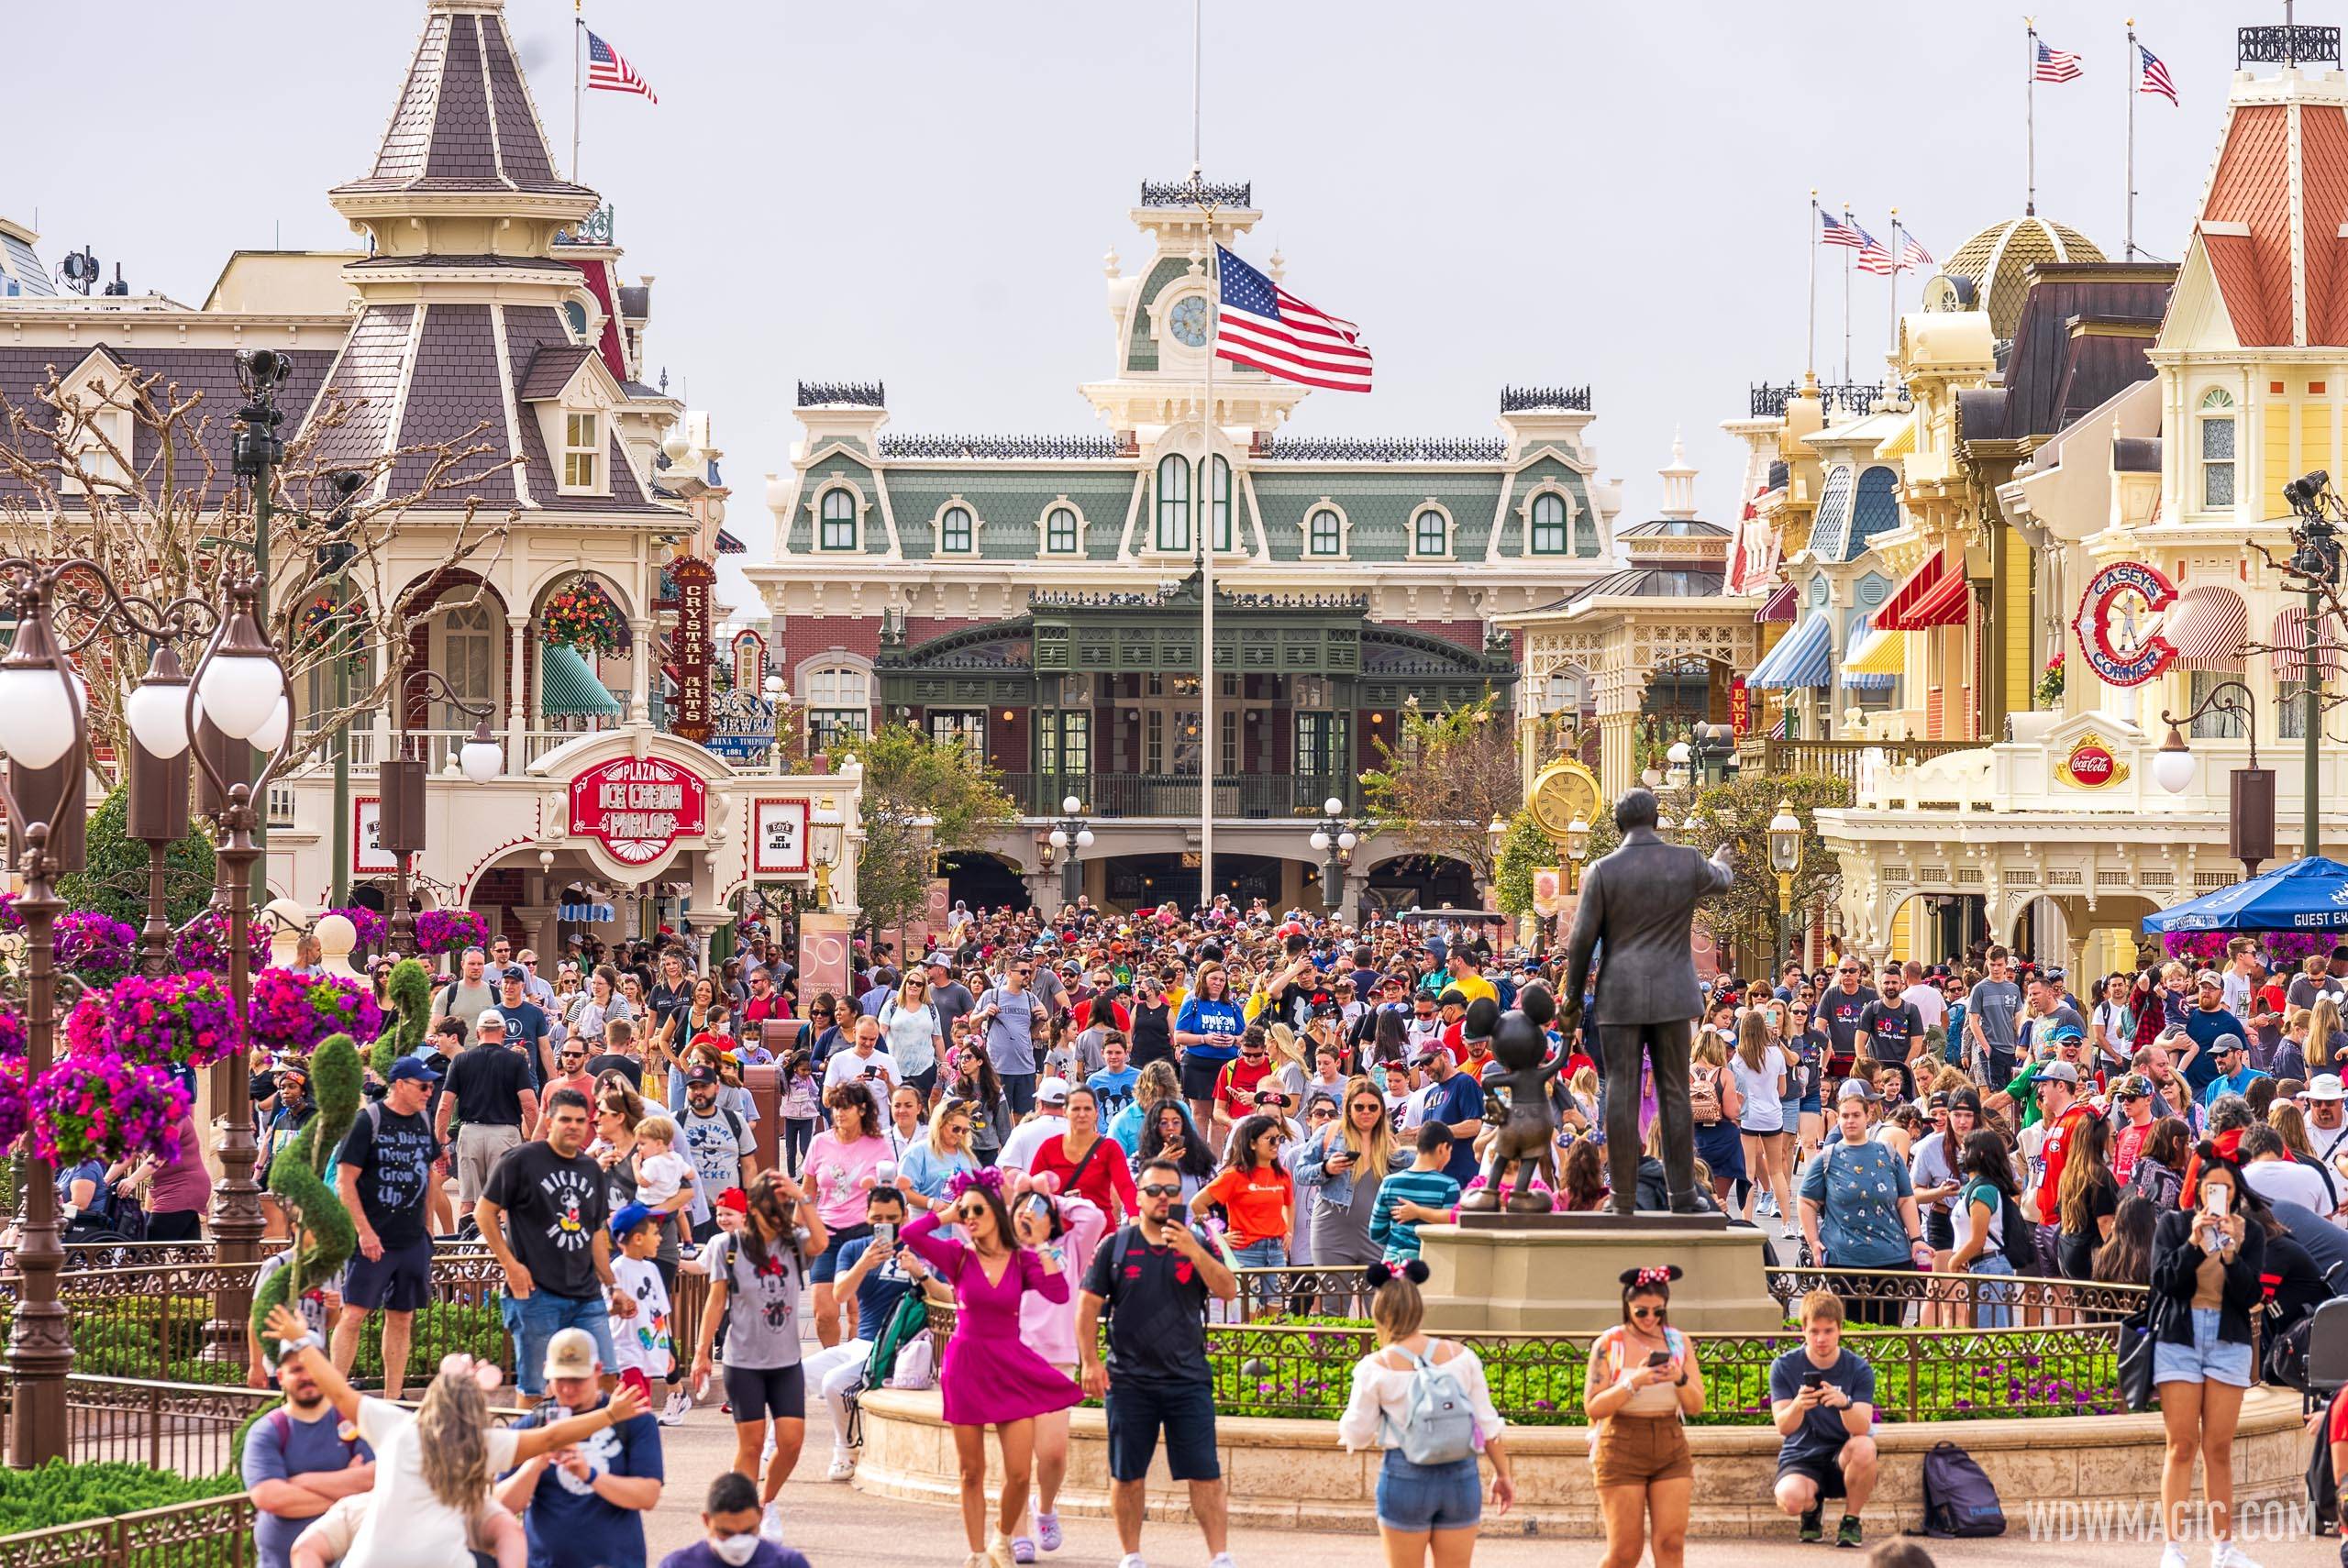 Spring Break crowds are at Walt Disney World and wait times are long at all the parks